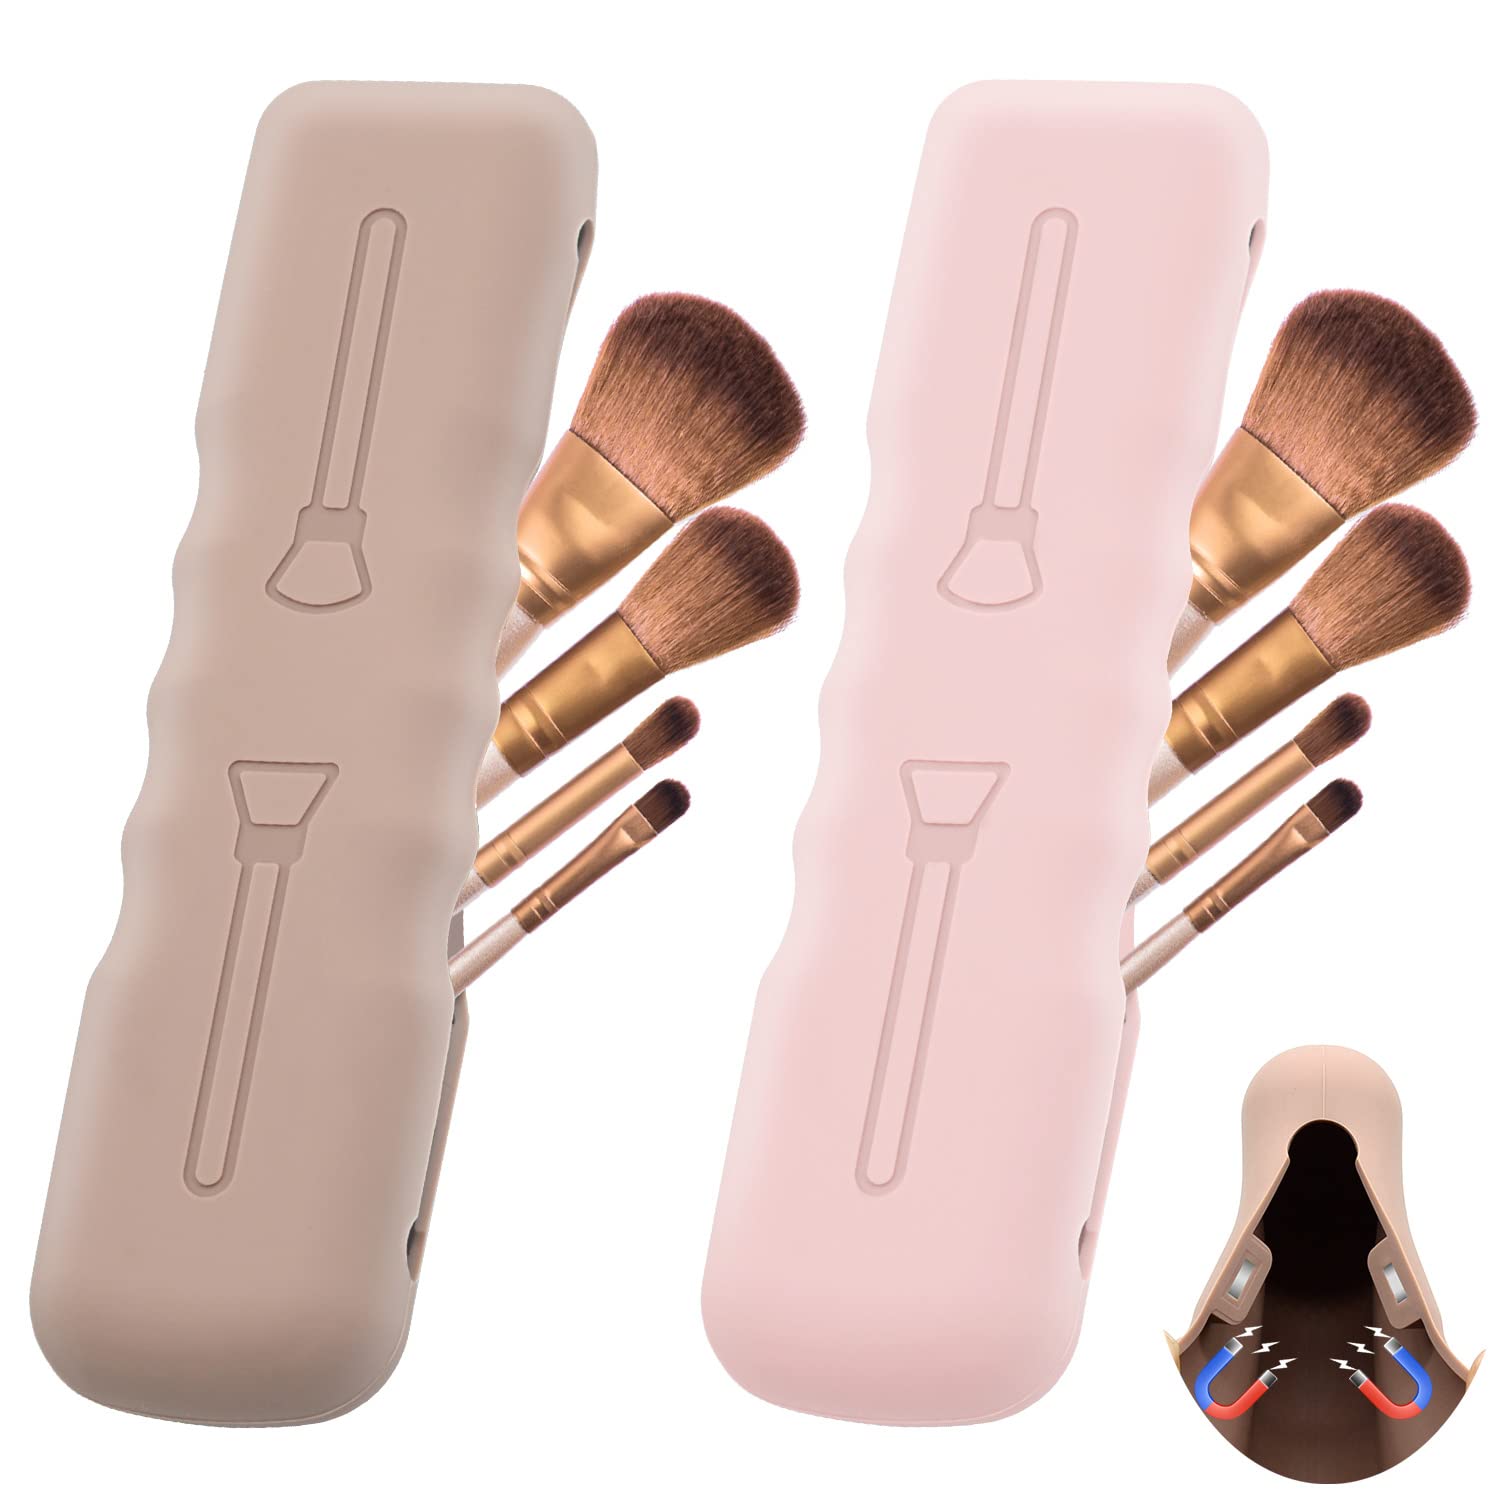 Hydream 2Pack Makeup Brush Holder Travel Silicone Makeup Brush